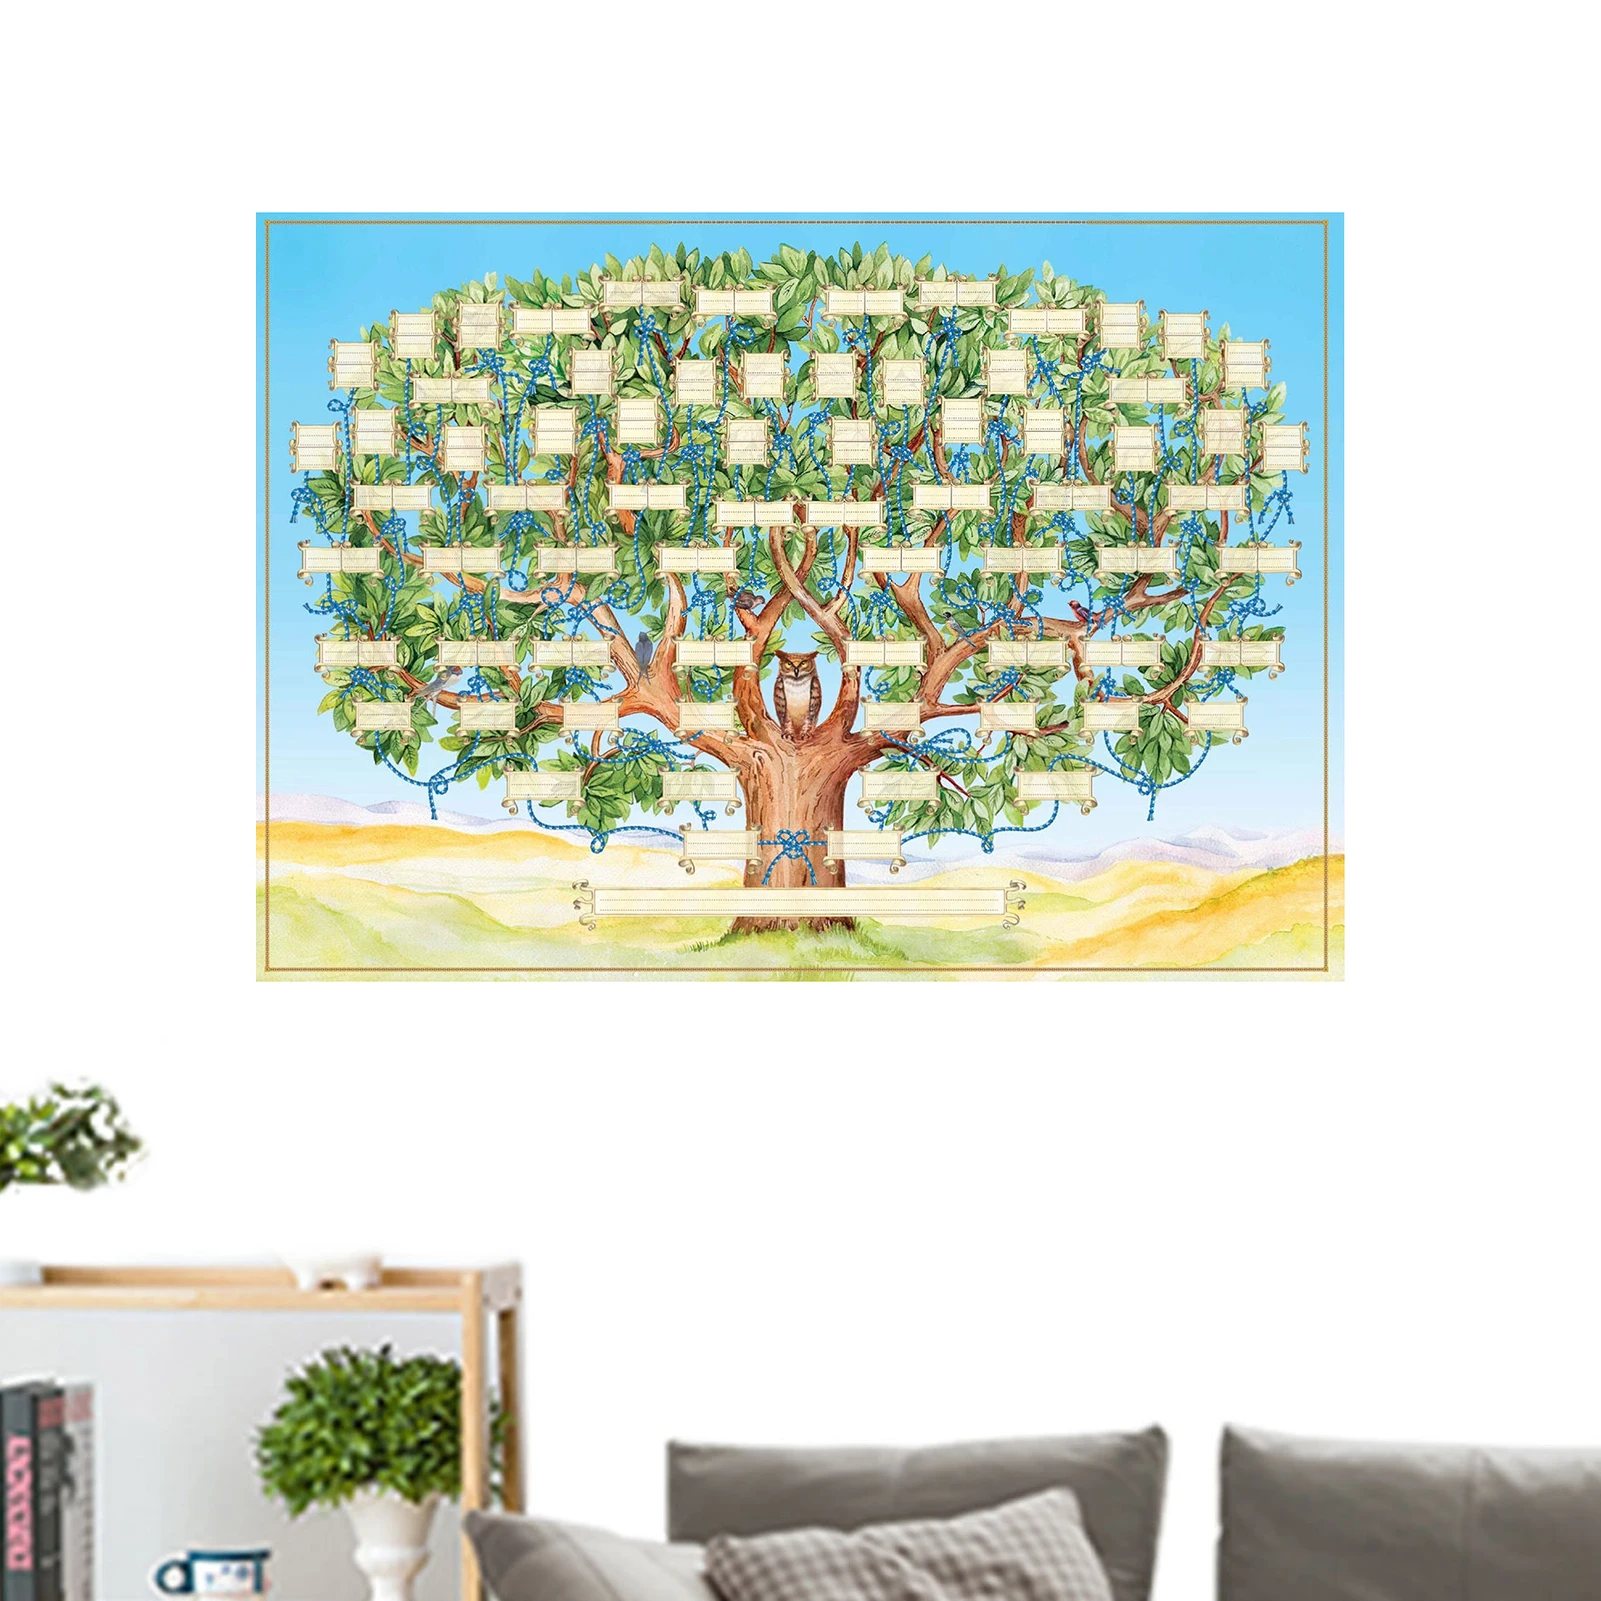 

Fill In Family Tree Diagram Blank Ancestry Chart Family History Posters For Children To Fill In And Know Their Family 40x60cm/15